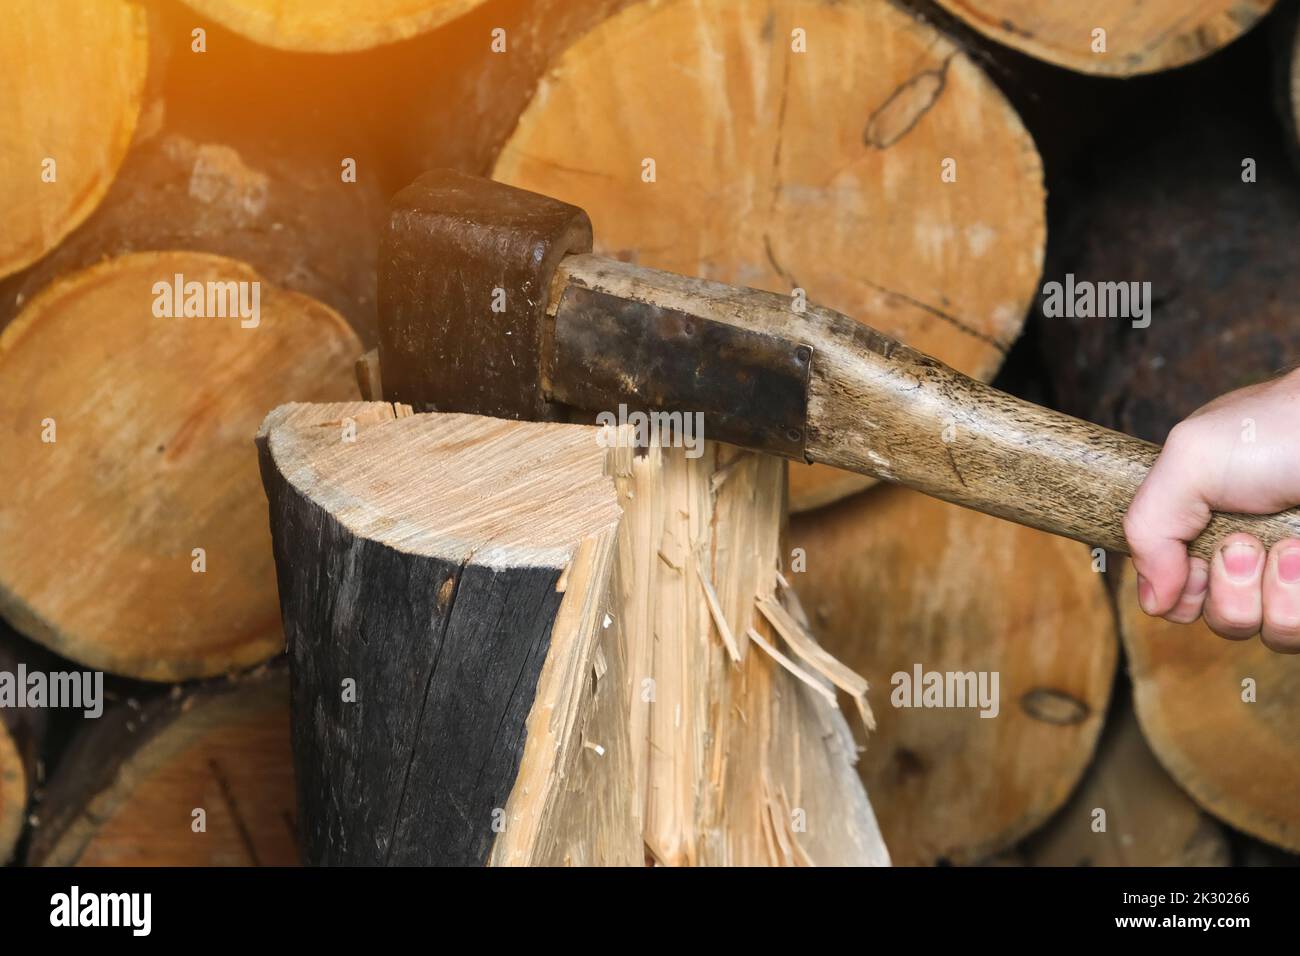 A man is chopping logs with an axe on chopping block. Harvesting of firewood stocks for heating. An alternative source of thermal energy instead of natural gas. Stock Photo